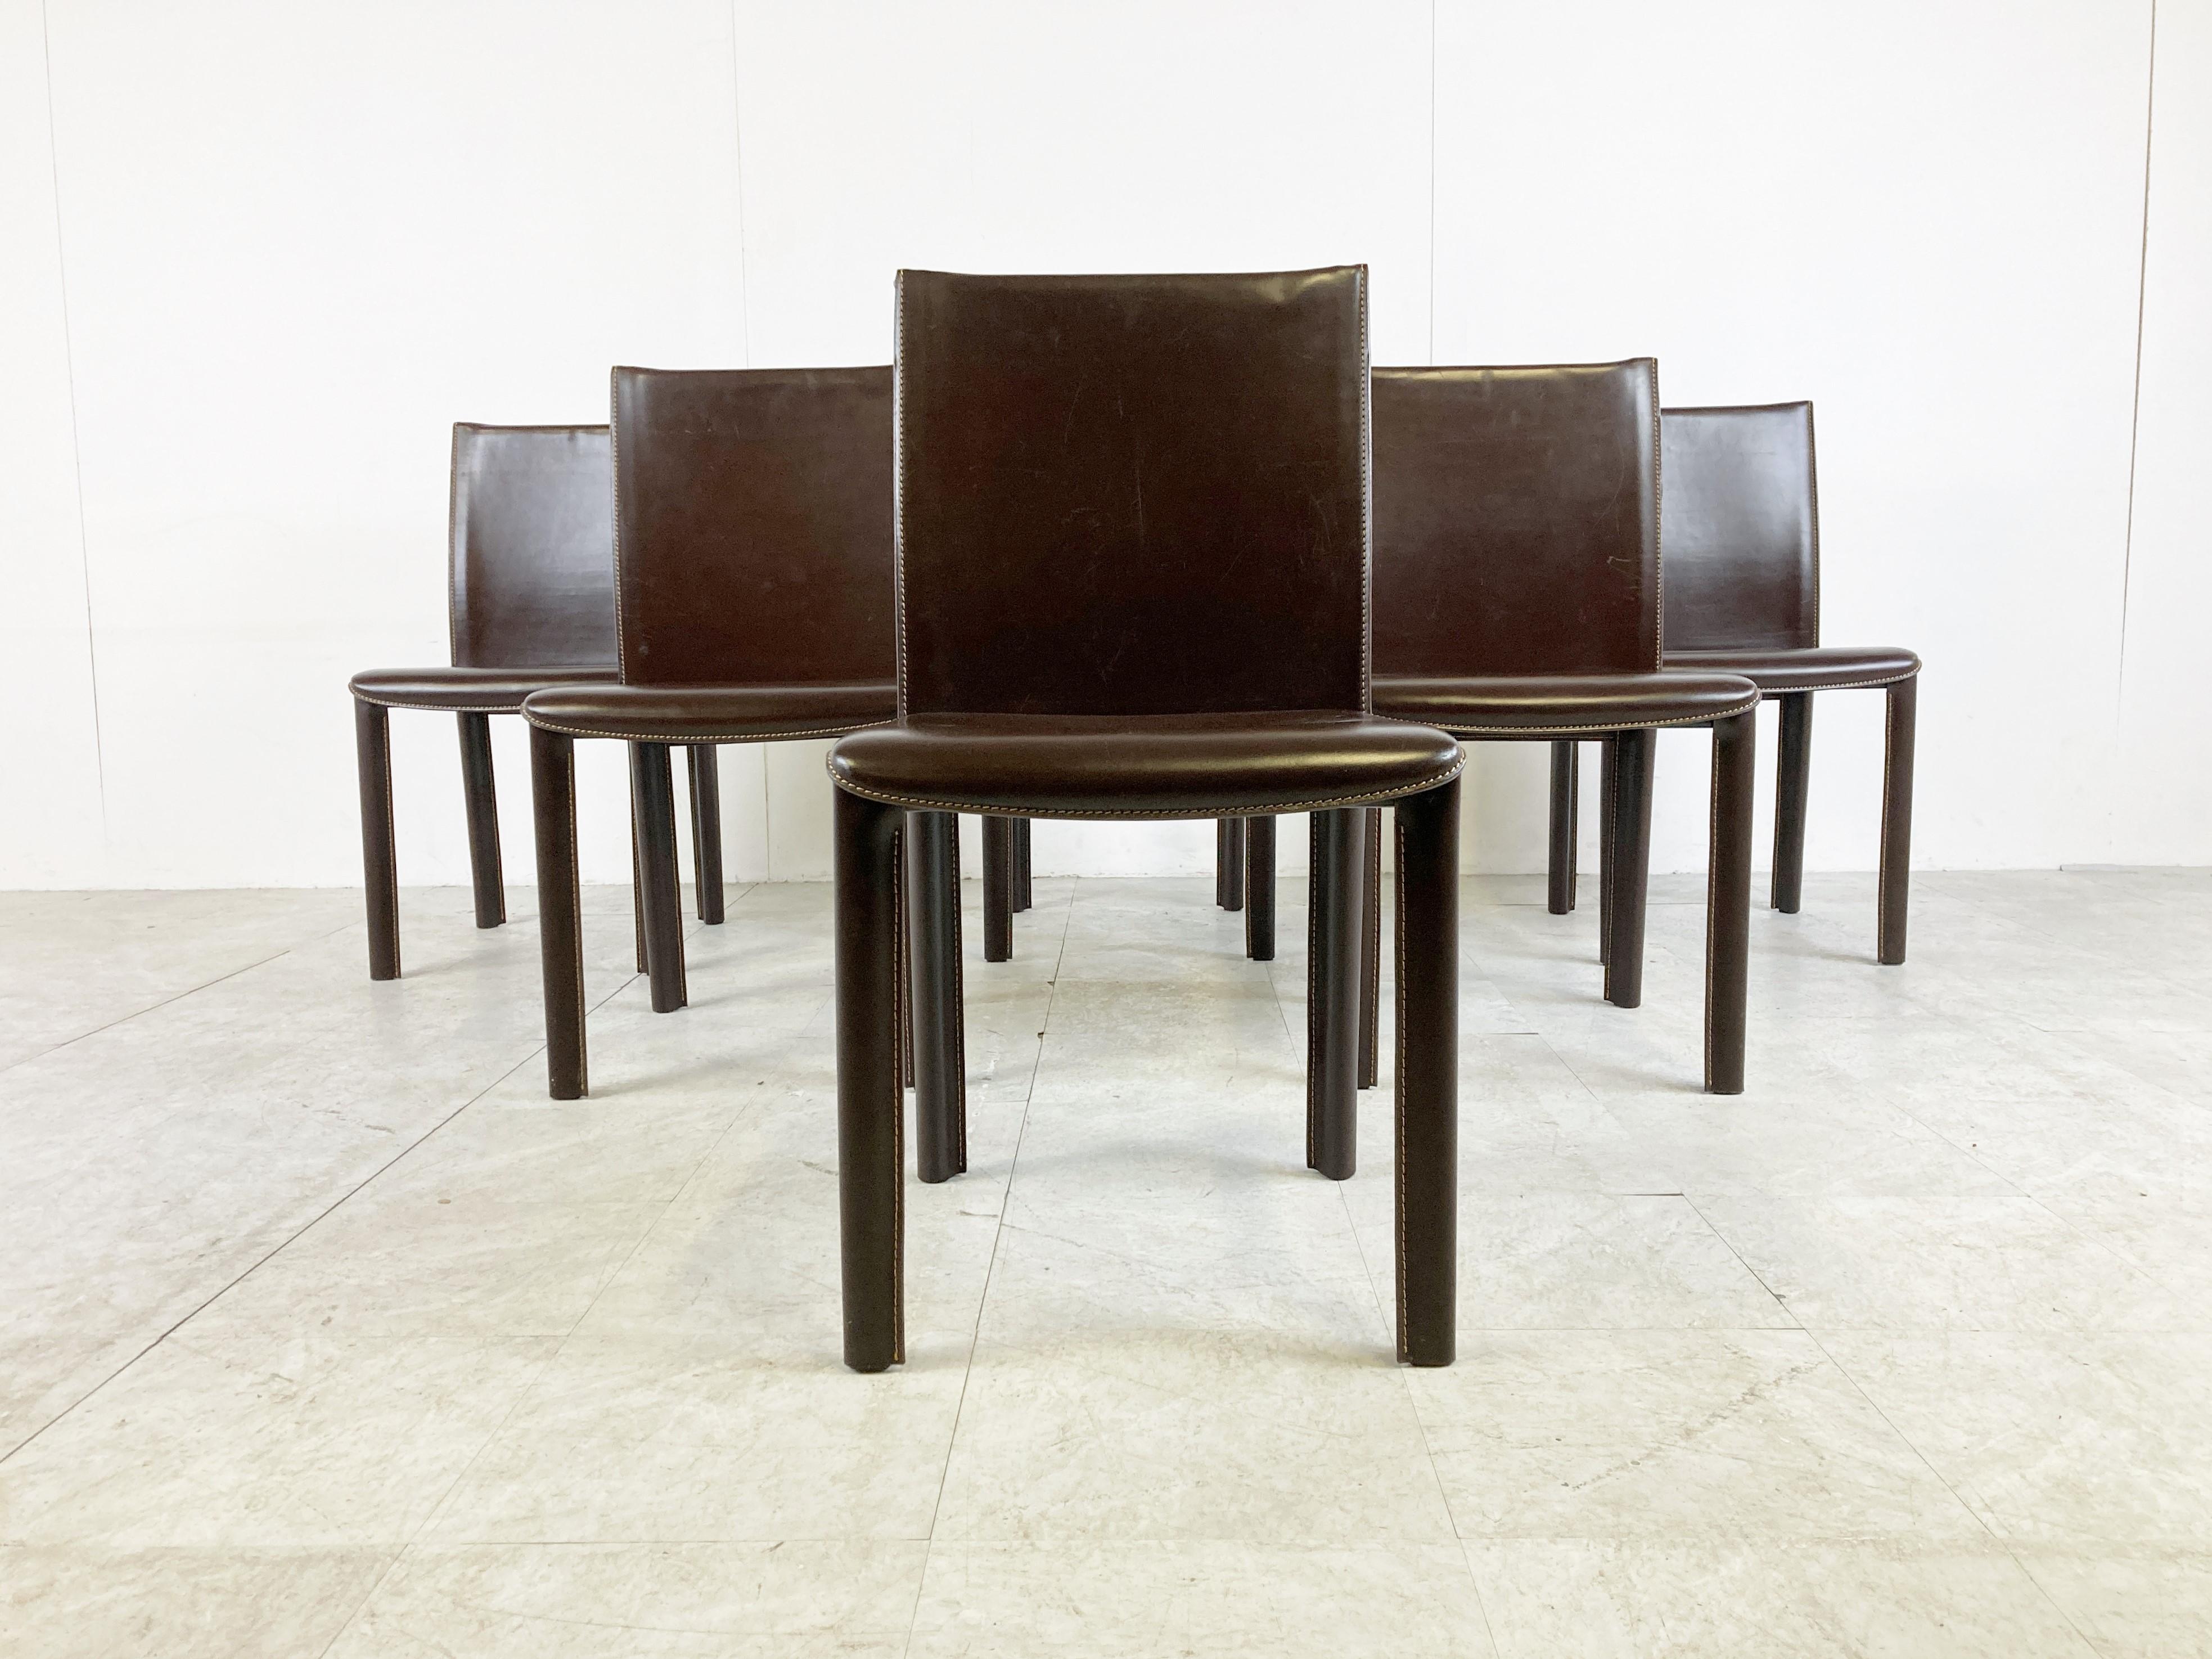 Late 20th Century Vintage Brown Leather Dining Chairs by Arper, Italy, 1980s